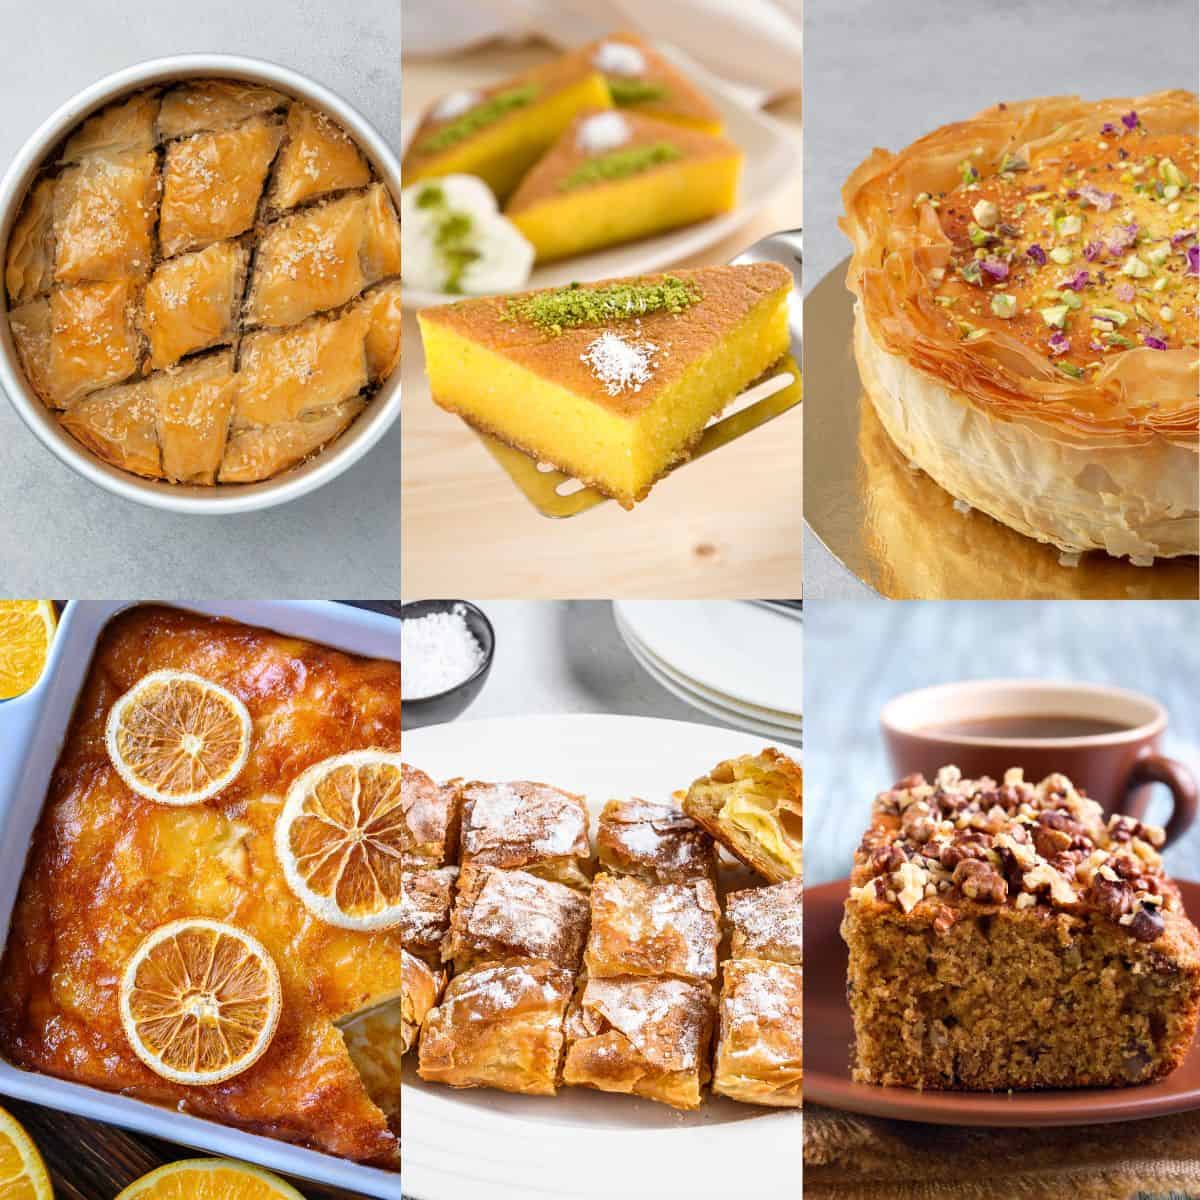 <p>From baklava and other filo pastry-based desserts to loukoumades, here are the <a href="https://www.spatuladesserts.com/greek-desserts/">best Greek desserts</a>, all in one place. Greece is known as the cradle of Western civilization for a reason, and Greek desserts arguably might be one of them. Check out these recipes for Greek desserts and find your favorite.</p><p><strong>Go to the recipe: <a href="https://www.spatuladesserts.com/greek-desserts/">Best Greek Desserts</a></strong></p><p><strong>This article was originally published as <a href="https://www.spatuladesserts.com/pistachio-desserts/">Top 31 Best Pistachio Desserts</a> at <a href="https://www.spatuladesserts.com/">Spatula Desserts</a>.</strong></p>